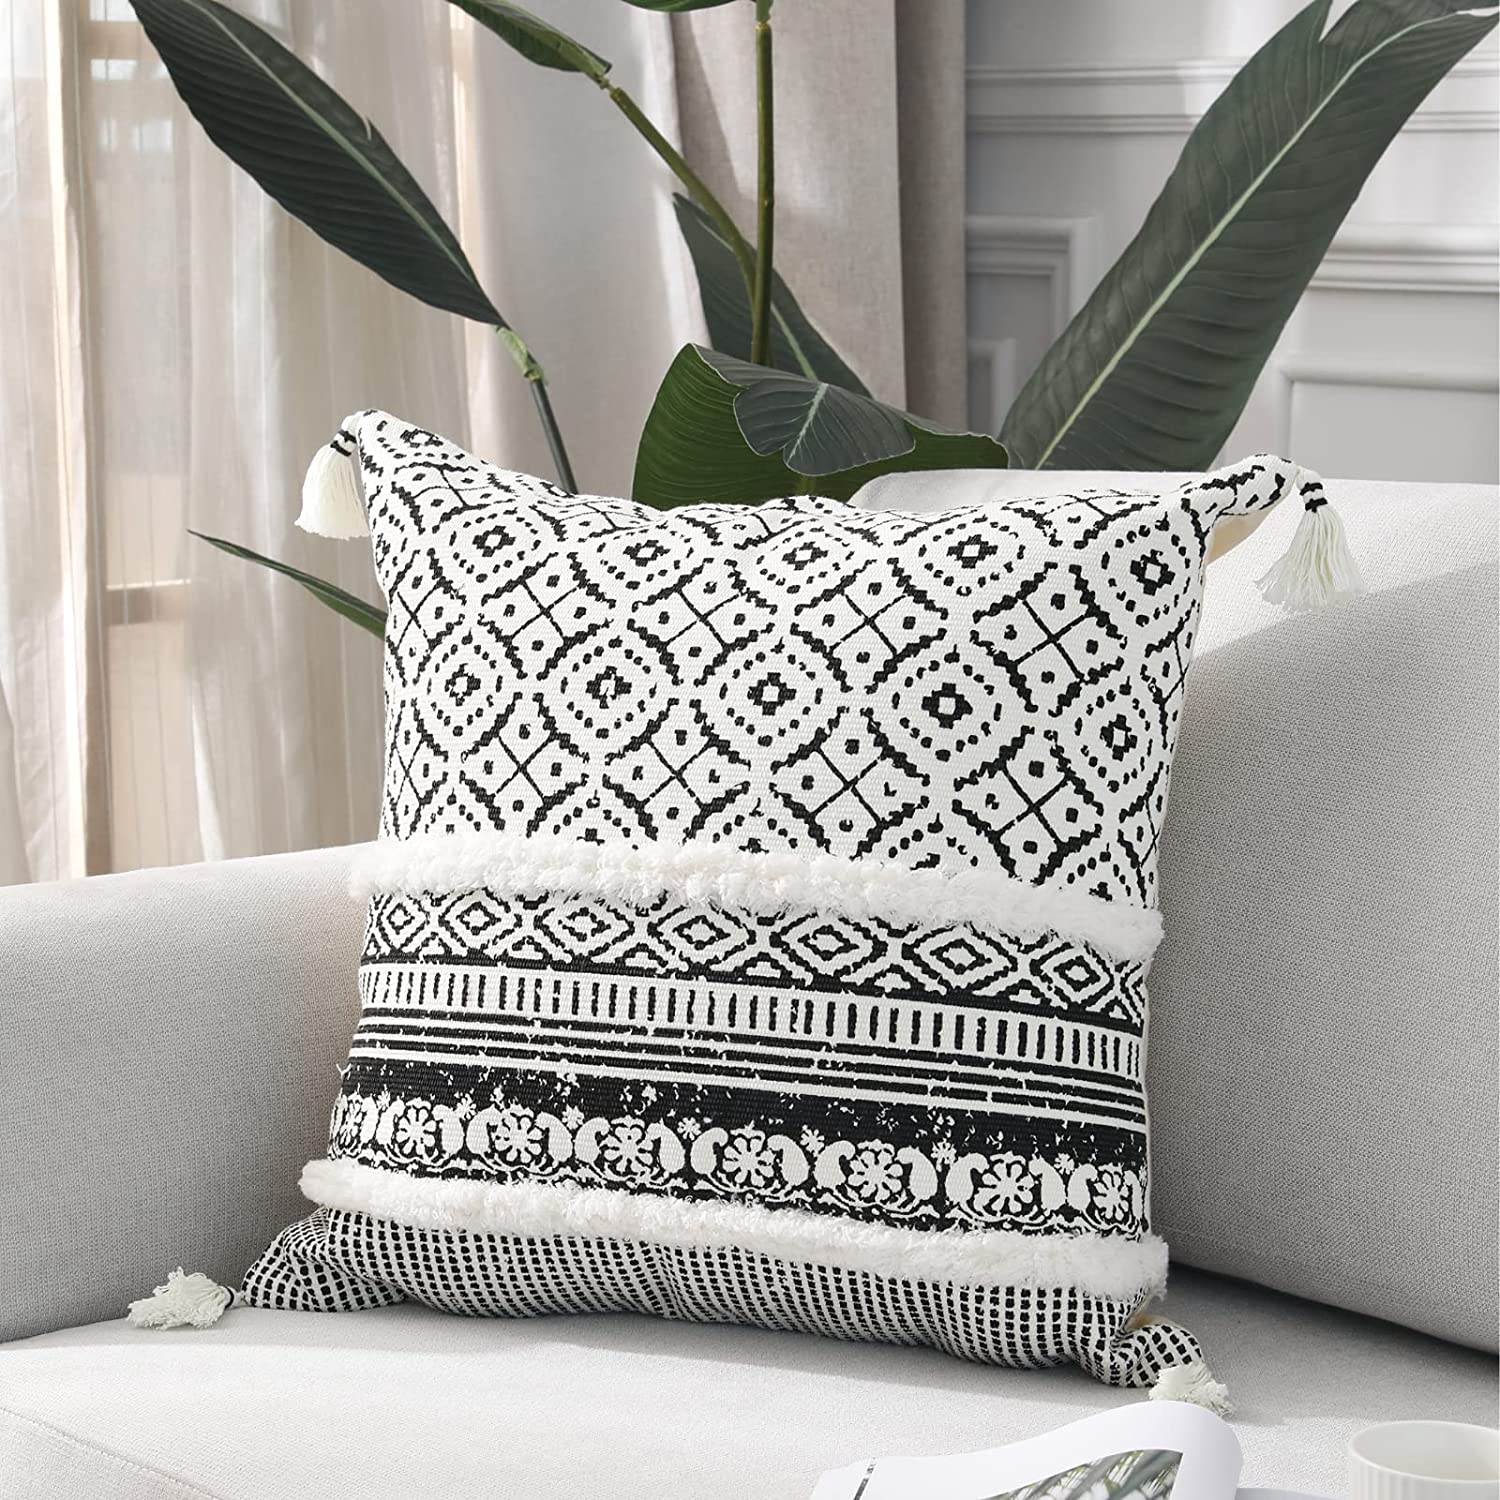 Boho Tufted Decorative Throw Pillow Covers for Couch Sofa Modern Moroccan  Pill eBay